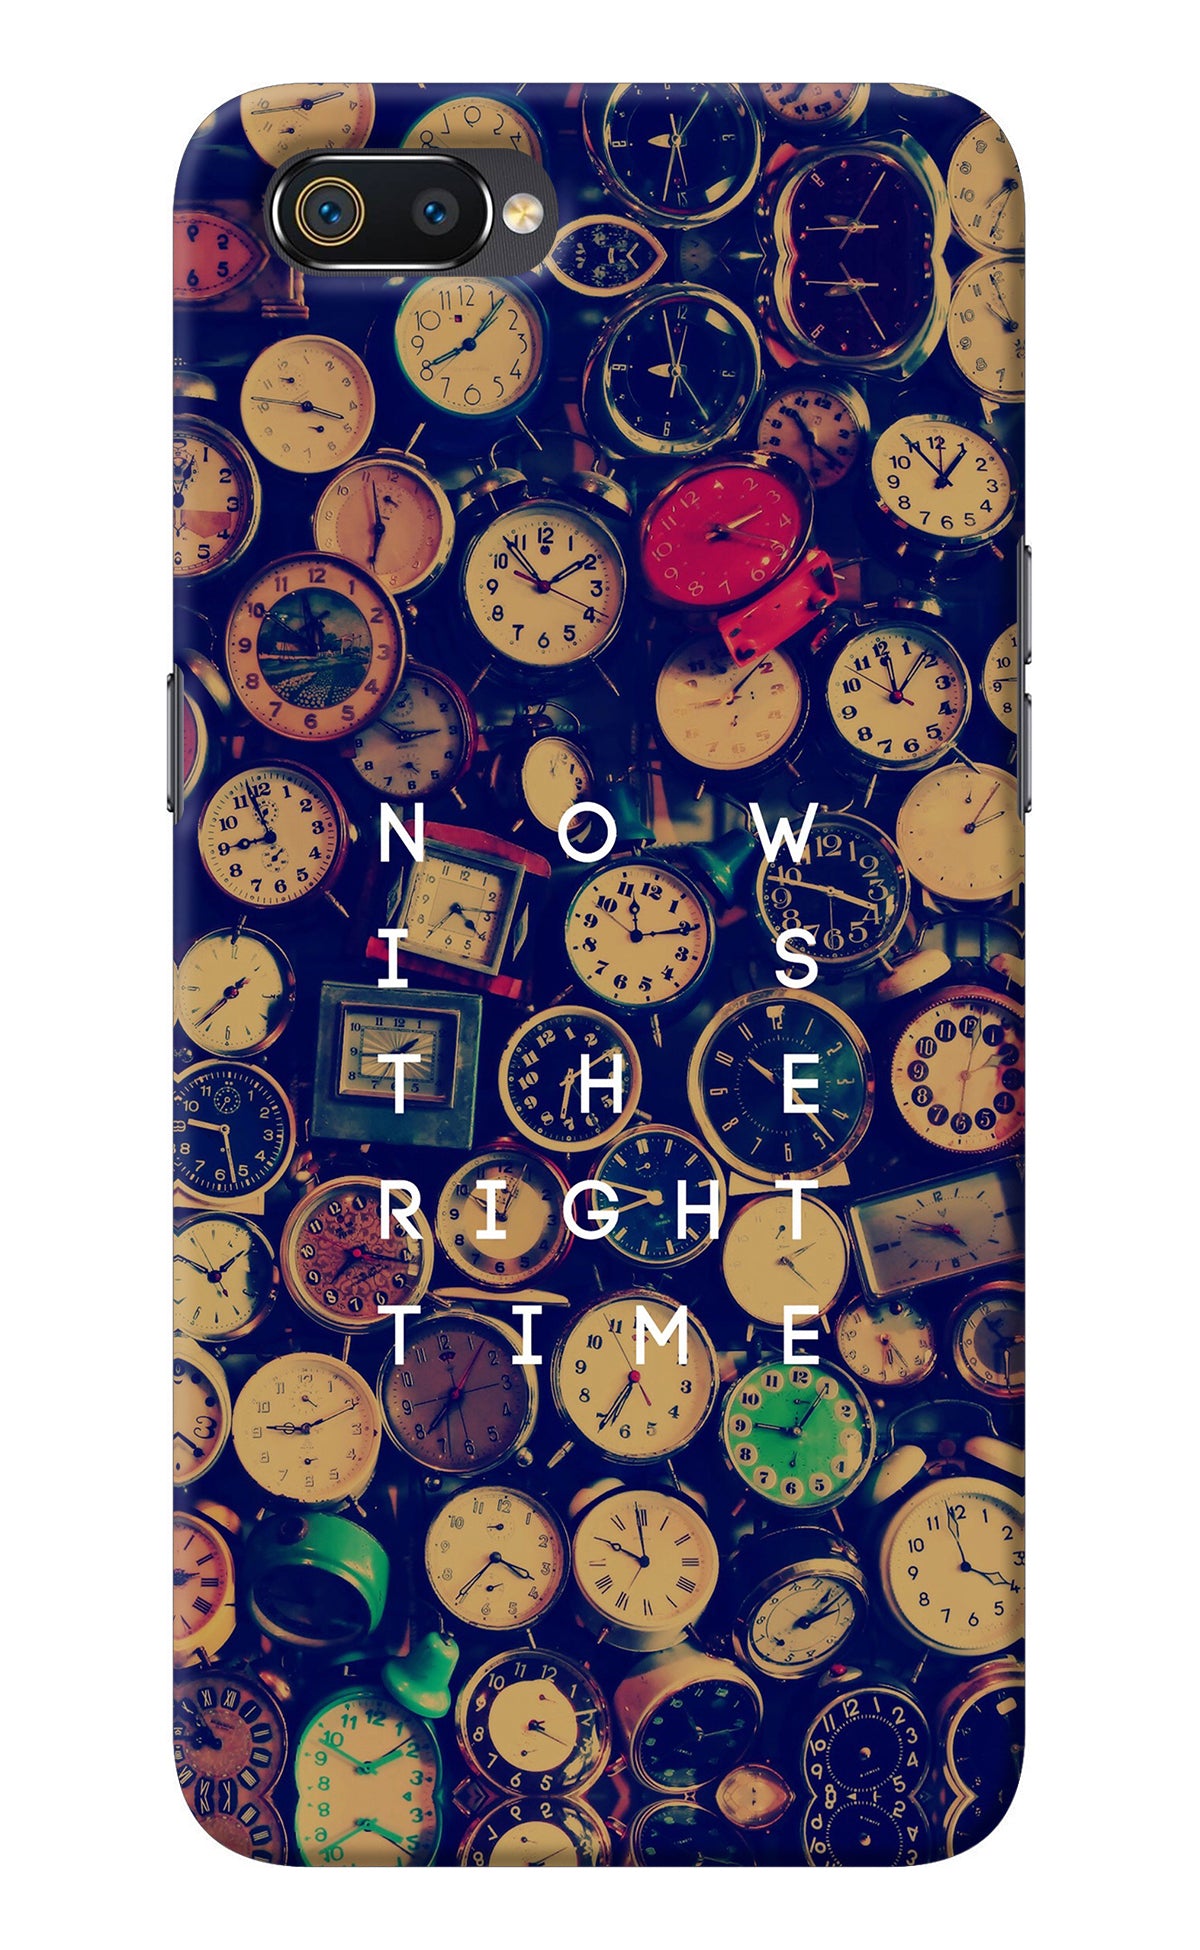 Now is the Right Time Quote Realme C2 Back Cover